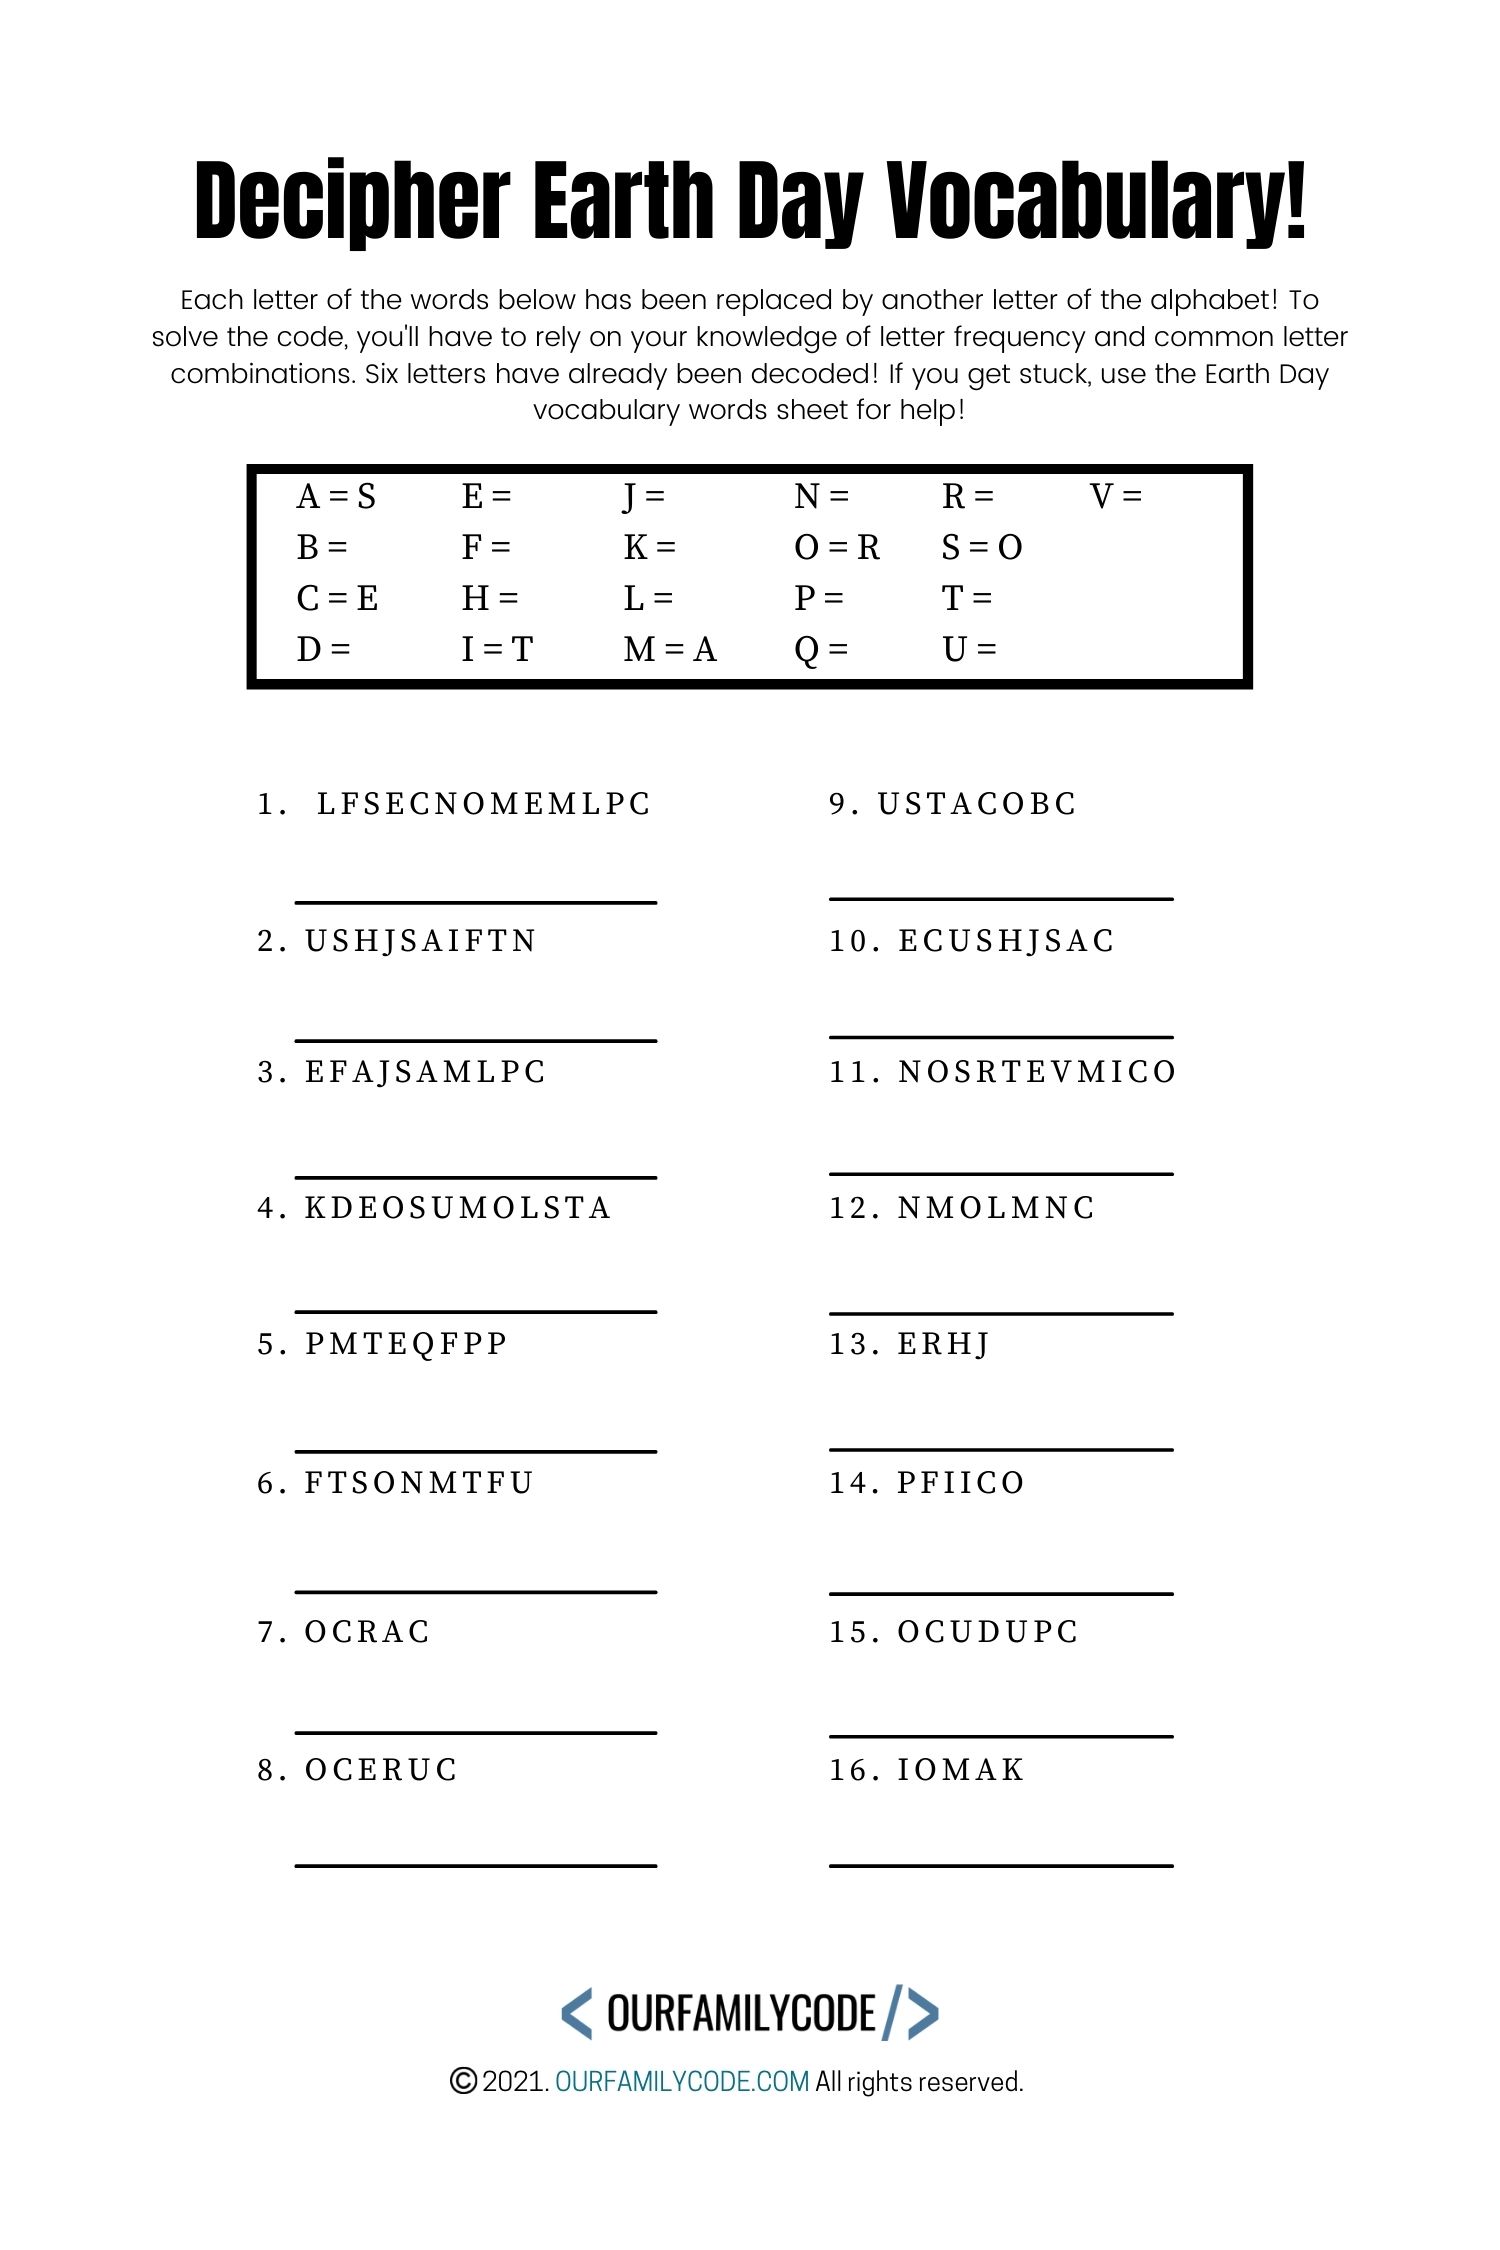 A picture of an Earth Day cryptogram word puzzle.